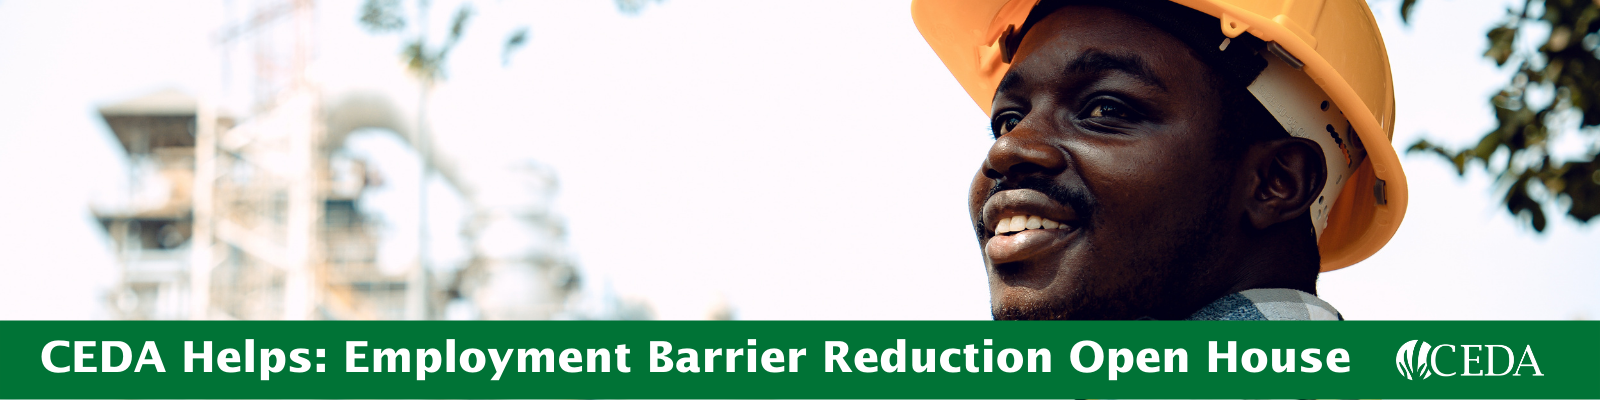 CEDA Helps: Employment Barrier Reduction Open House